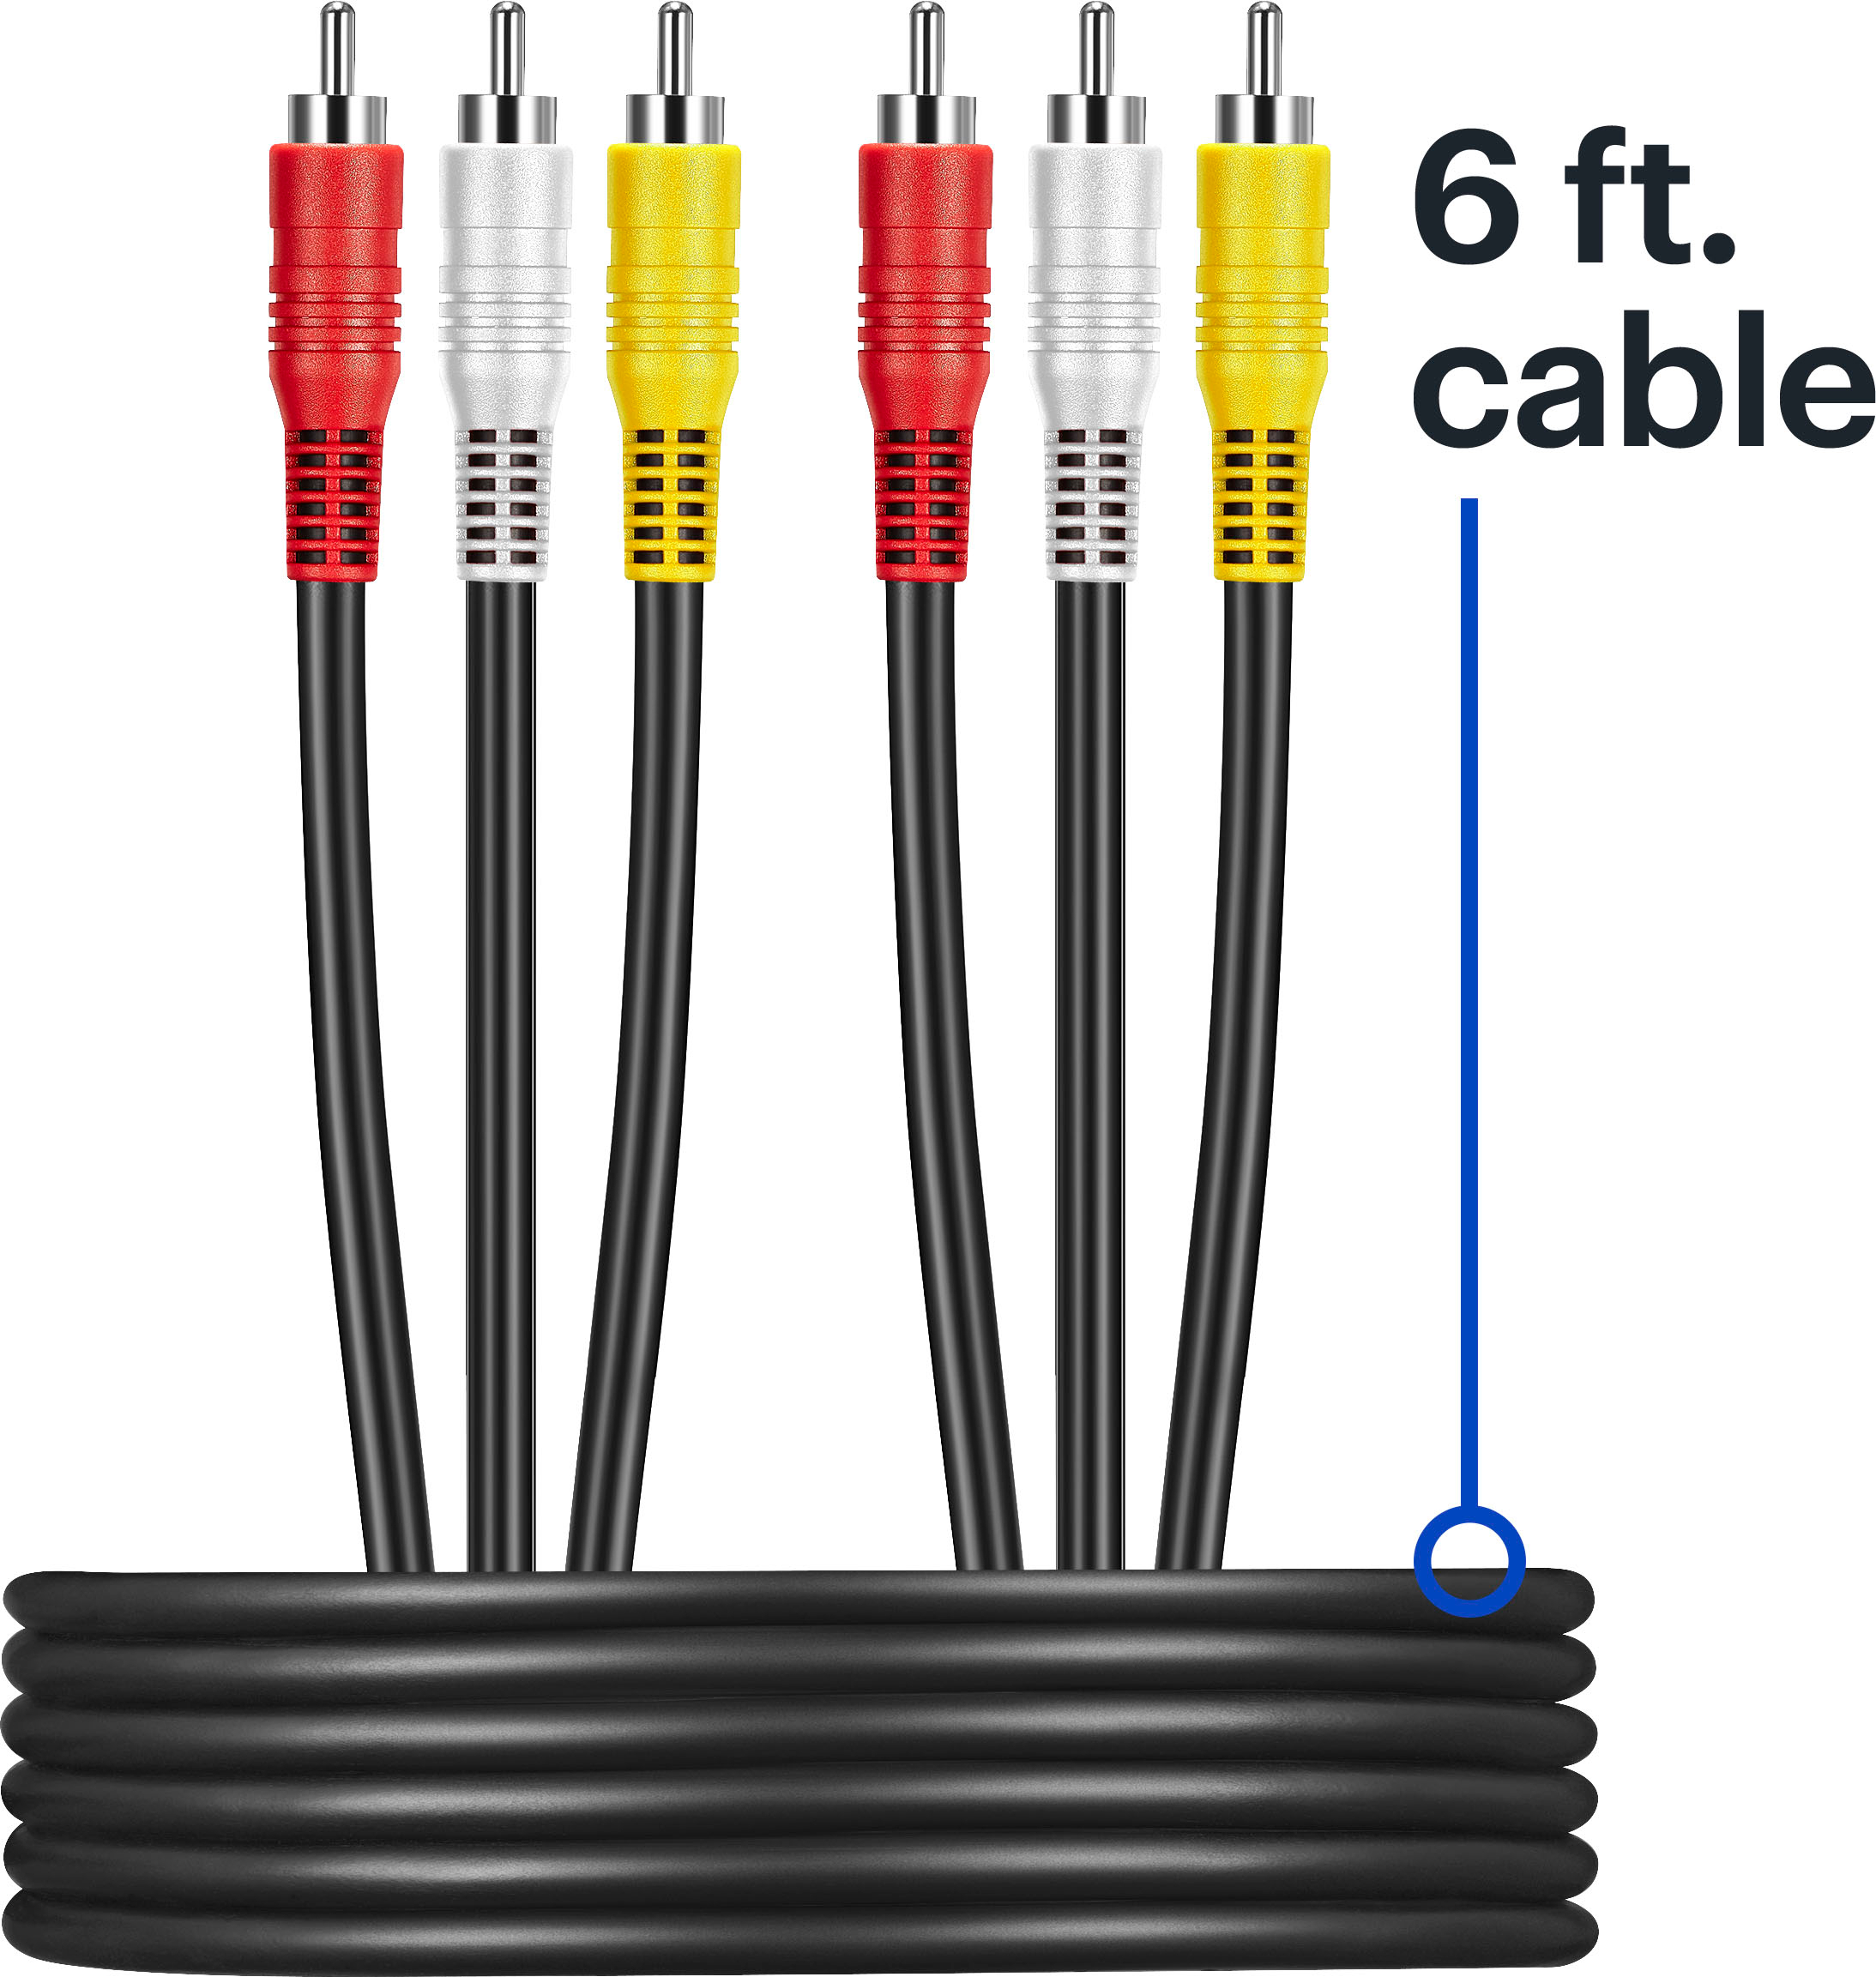 AV Cable - The Ultimate Guide You Need to Know